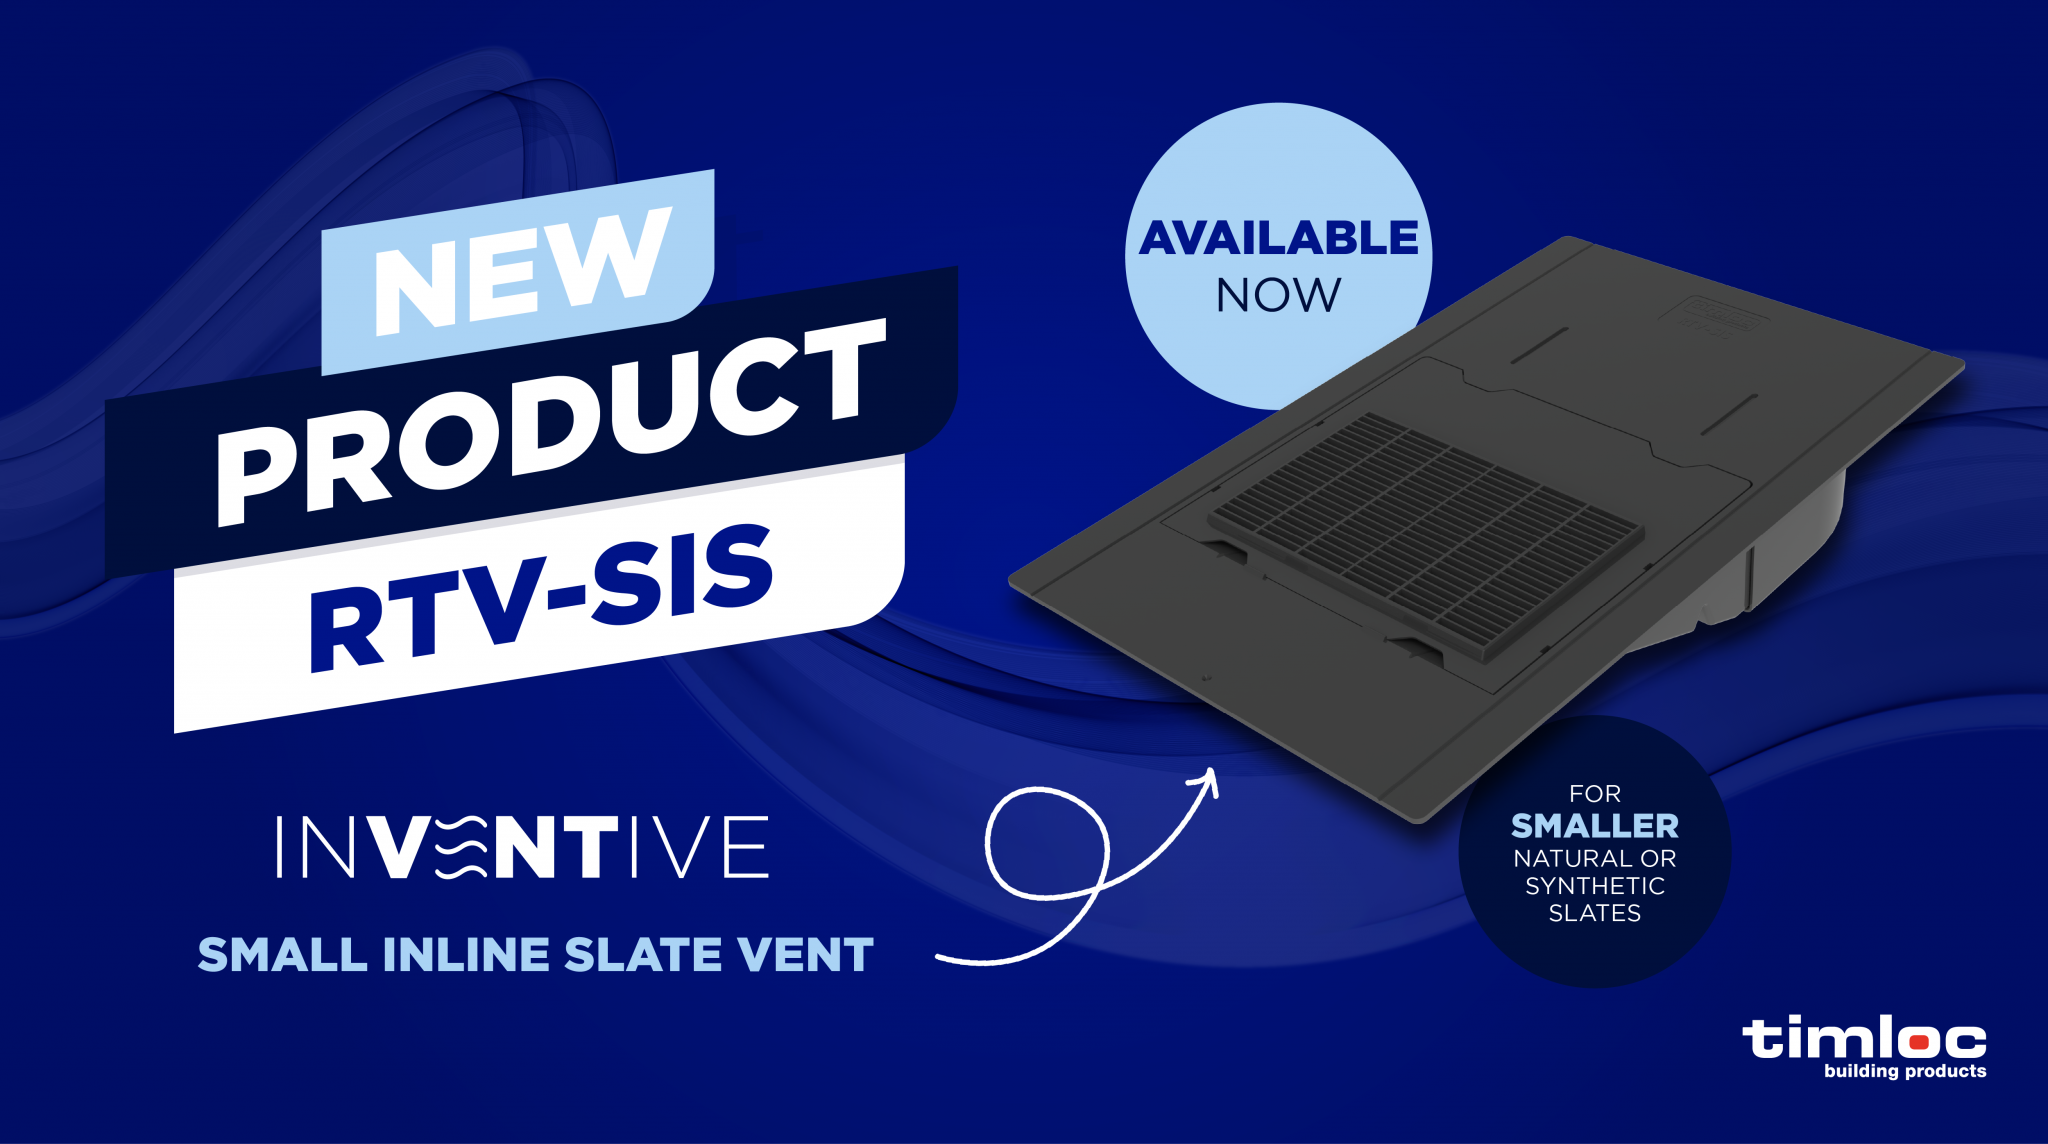 NEW InVentive Small Inline Slate Available Now - Timloc Building Products